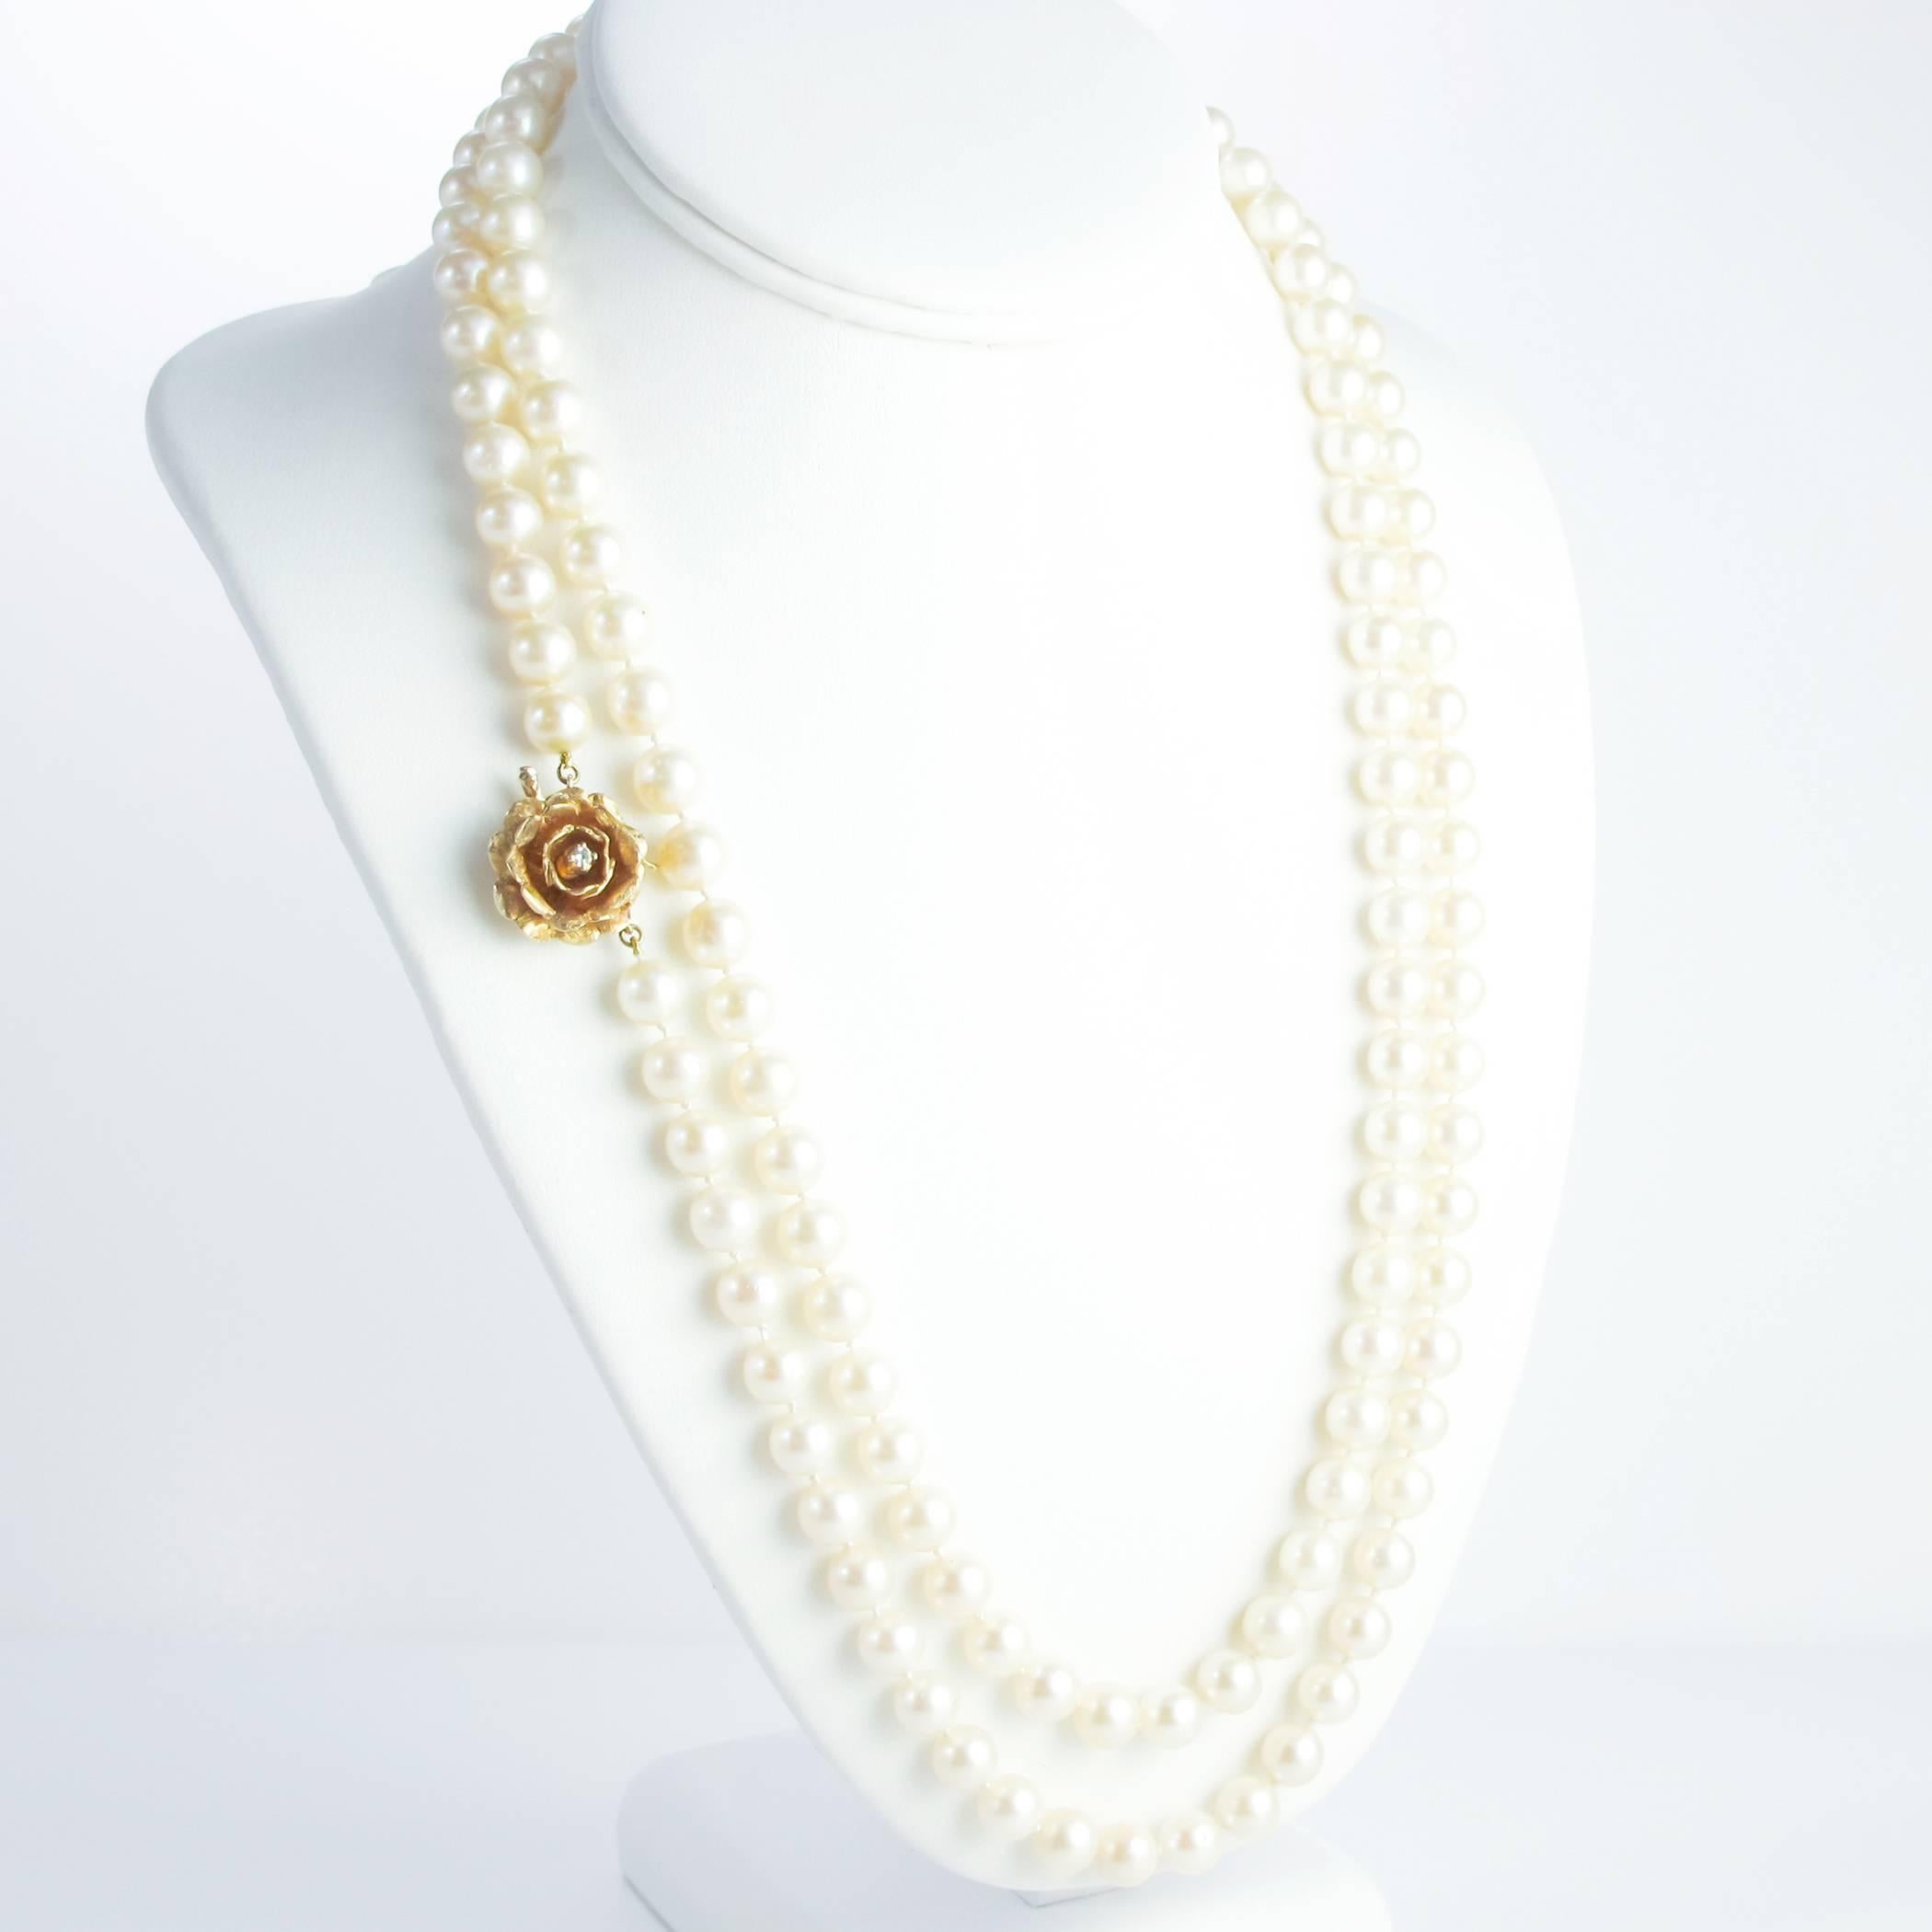 A mid century strand of 8 - 8.5mm saltwater cultured pearls measuring 51 inches long. The pearls are silver cream with slight rose, green and aubergine overtones. 

A beautiful 14K gold hand crafted clasp comes in the form of a ruffled rose and is